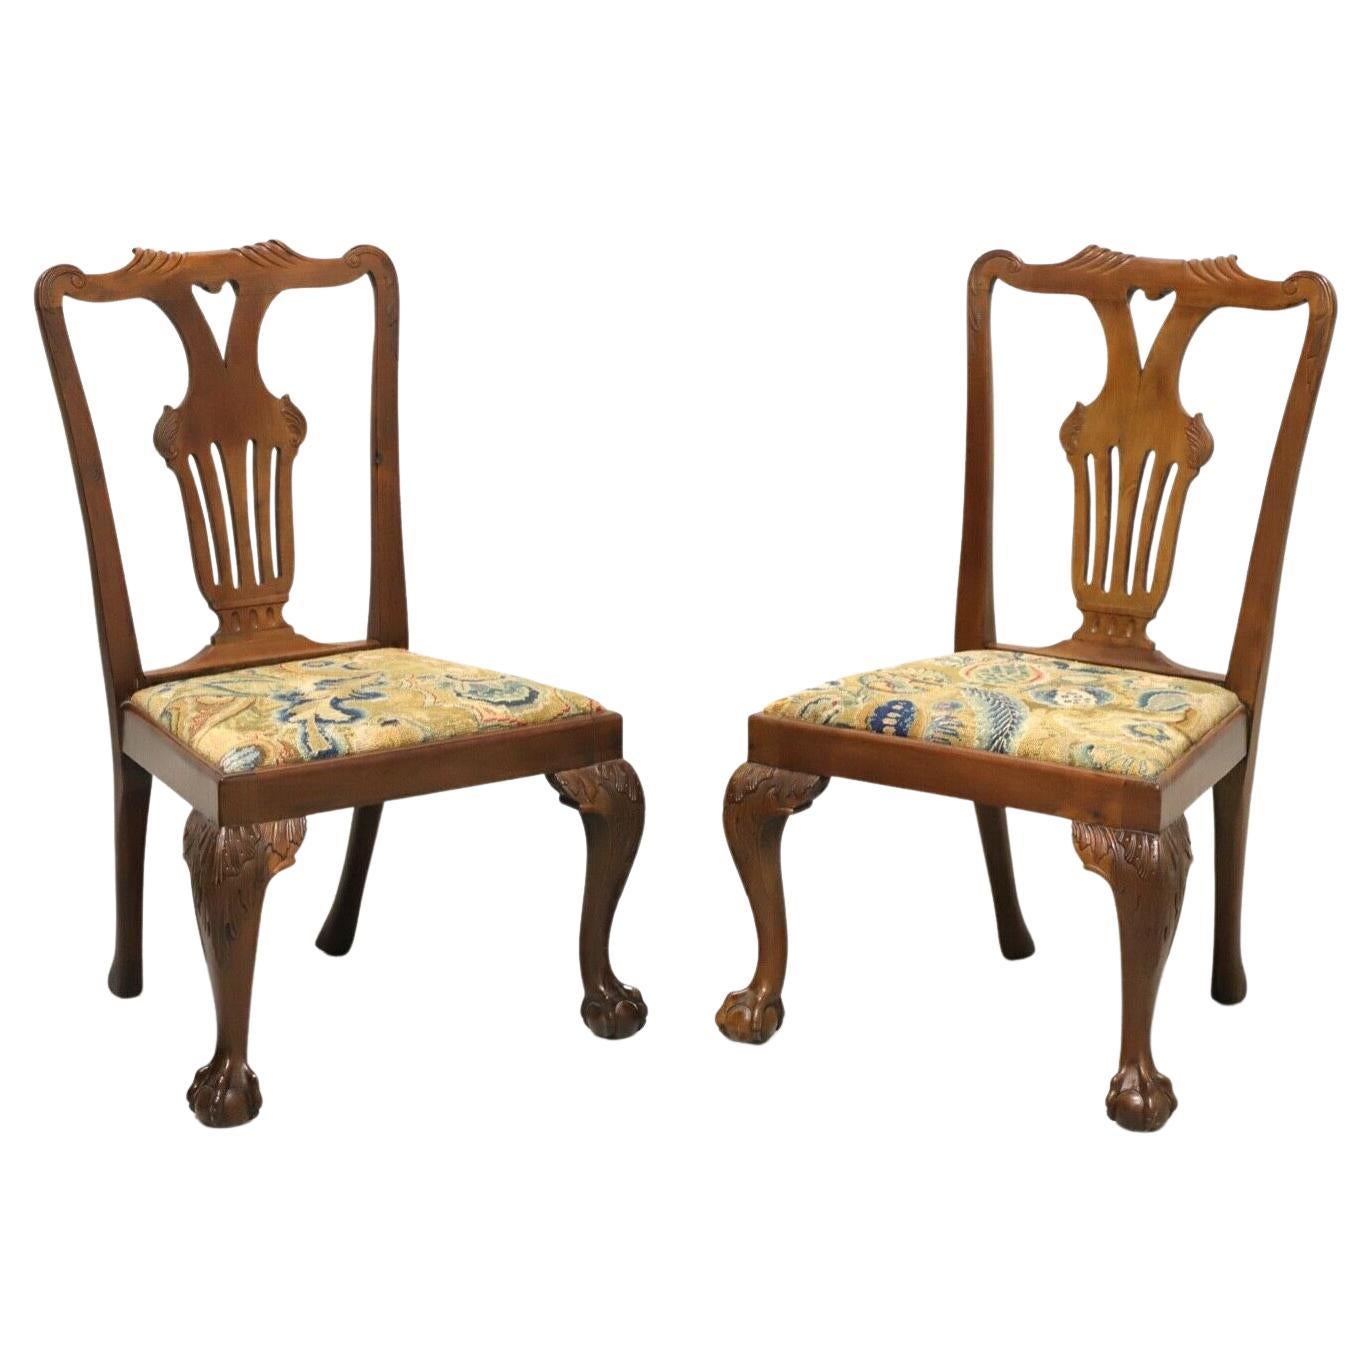 Antique 19th Century Carved Walnut Chippendale Ball n Claw Dining Chairs - Pair For Sale